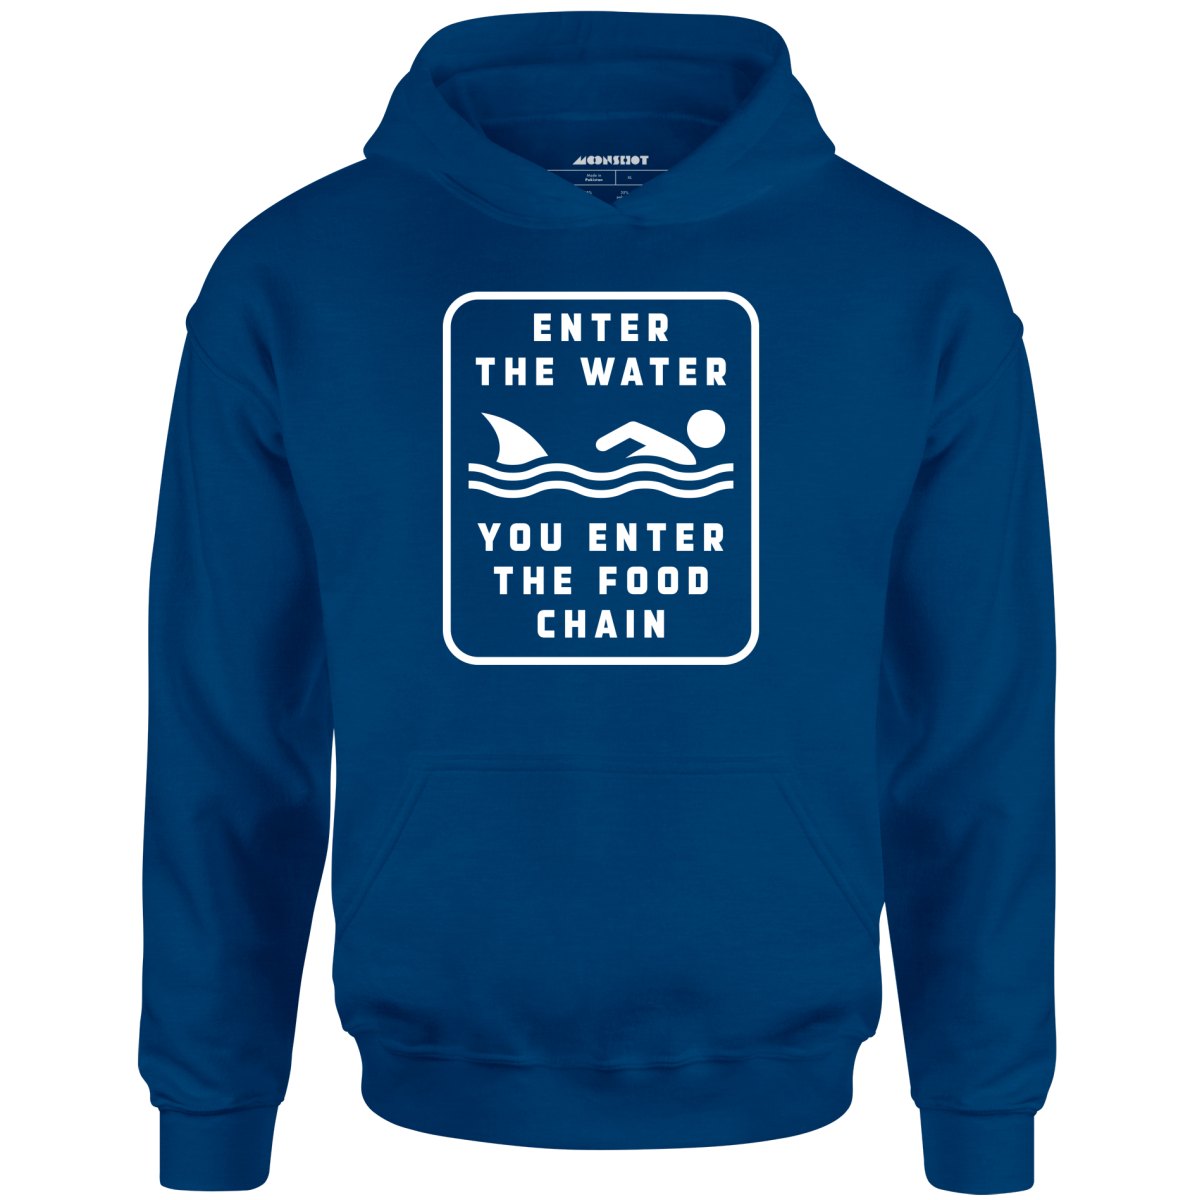 Enter the Water You Enter the Food Chain - Unisex Hoodie